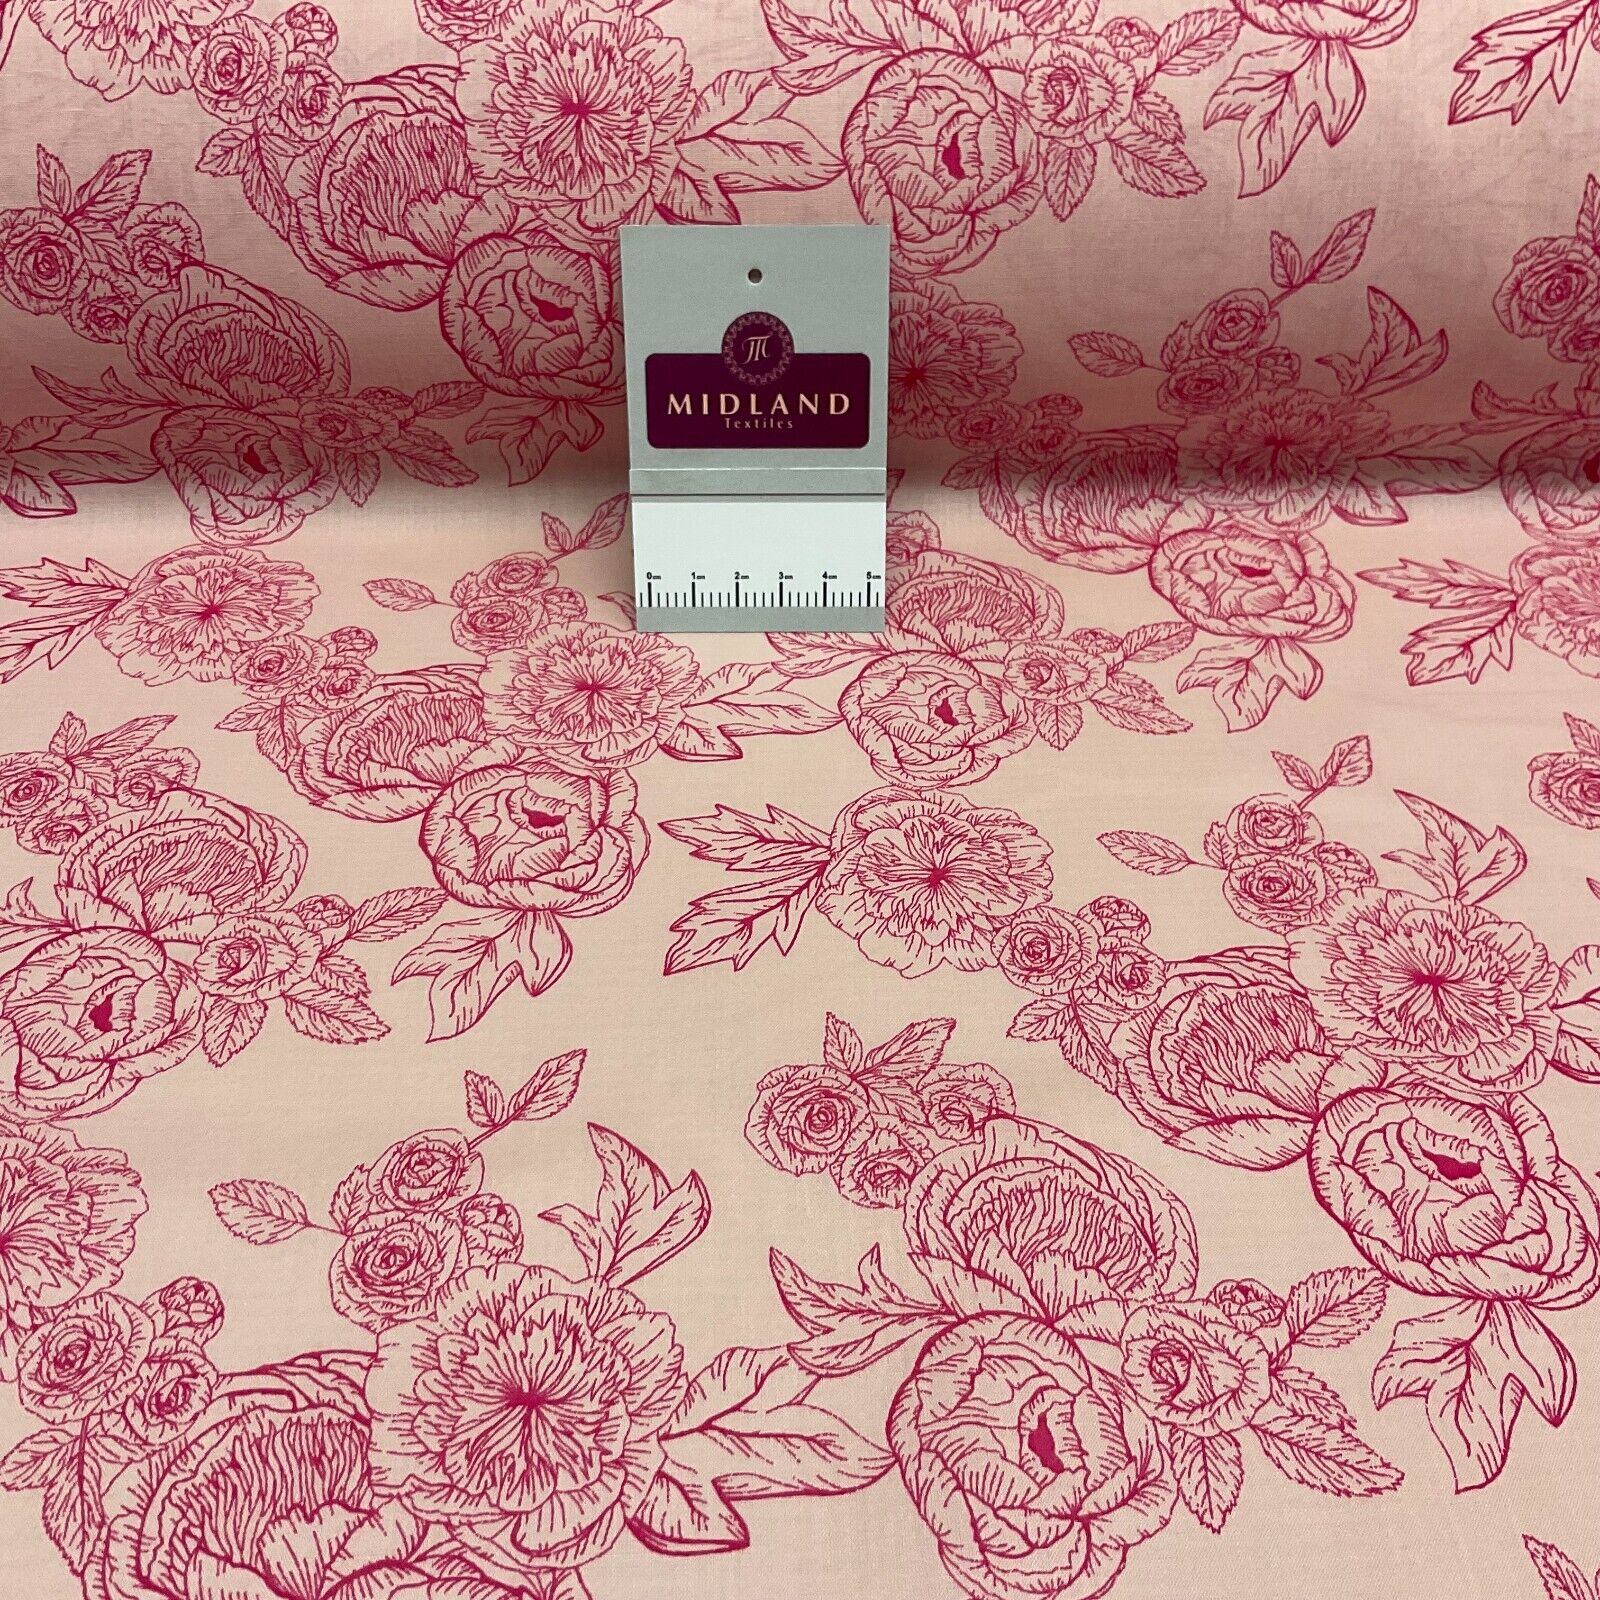 Roses and peony Vintage Floral Poly cotton printed fabric 110cm wide M1698